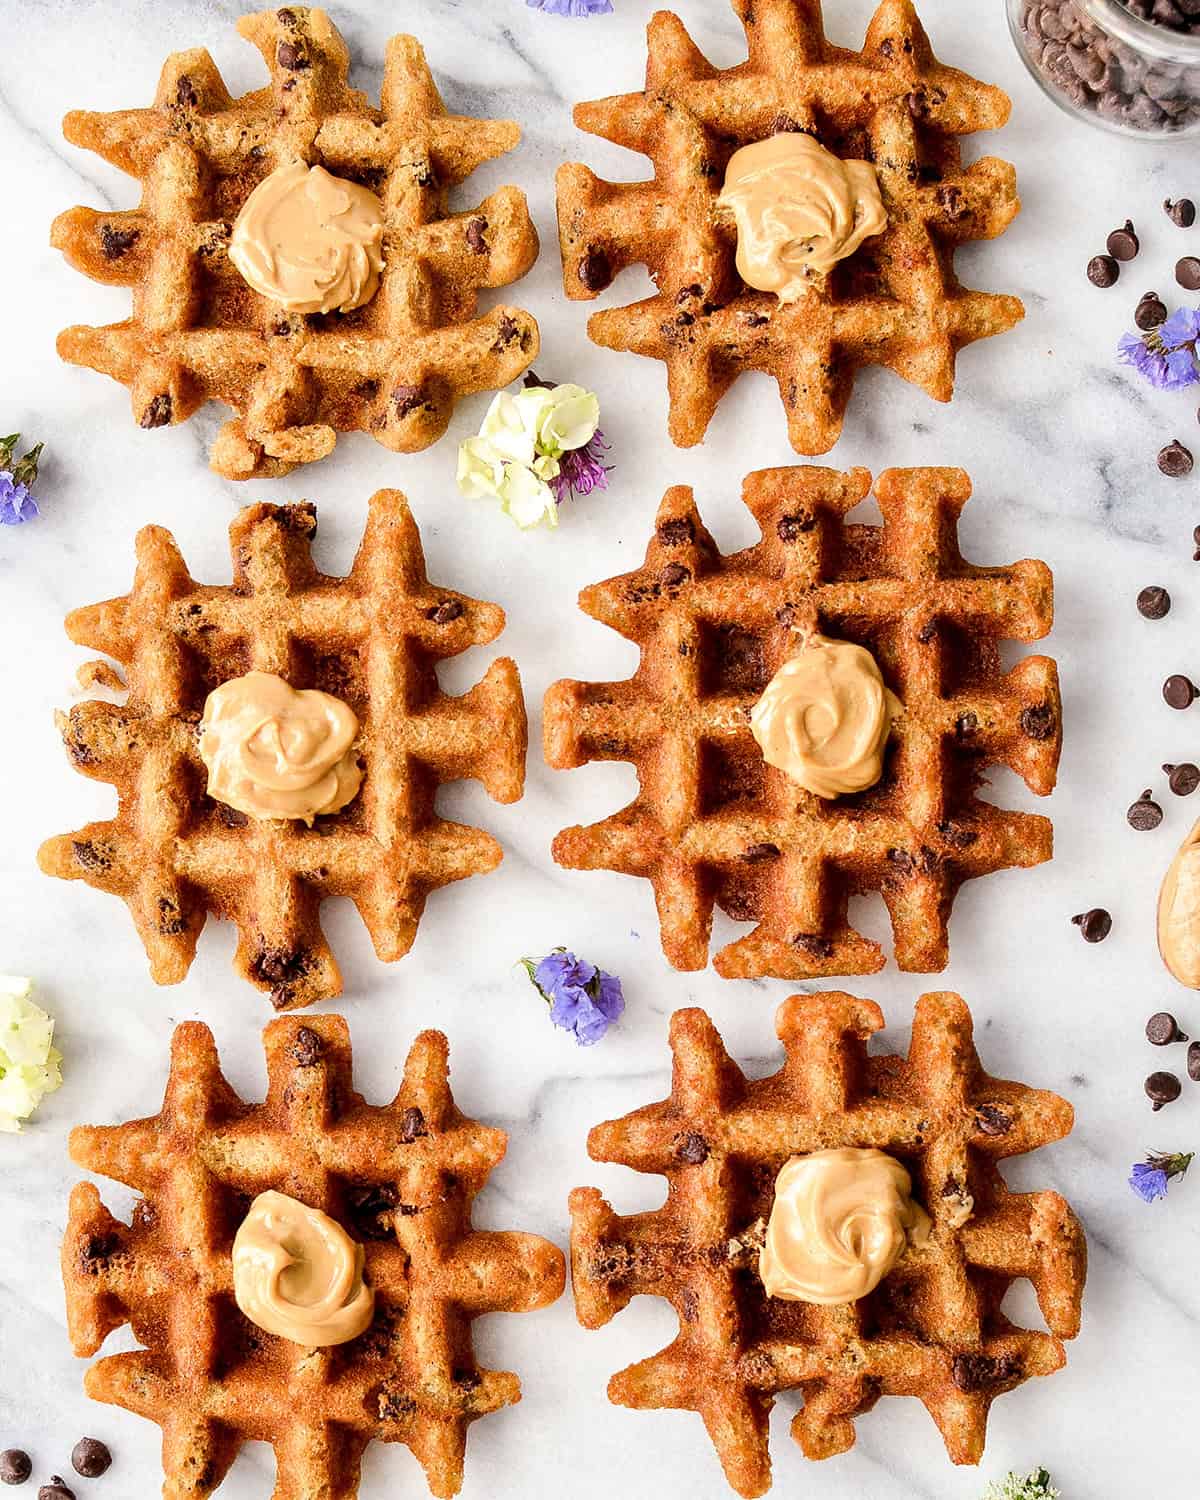 6 Gluten Free Peanut Butter Waffles with peanut butter on top